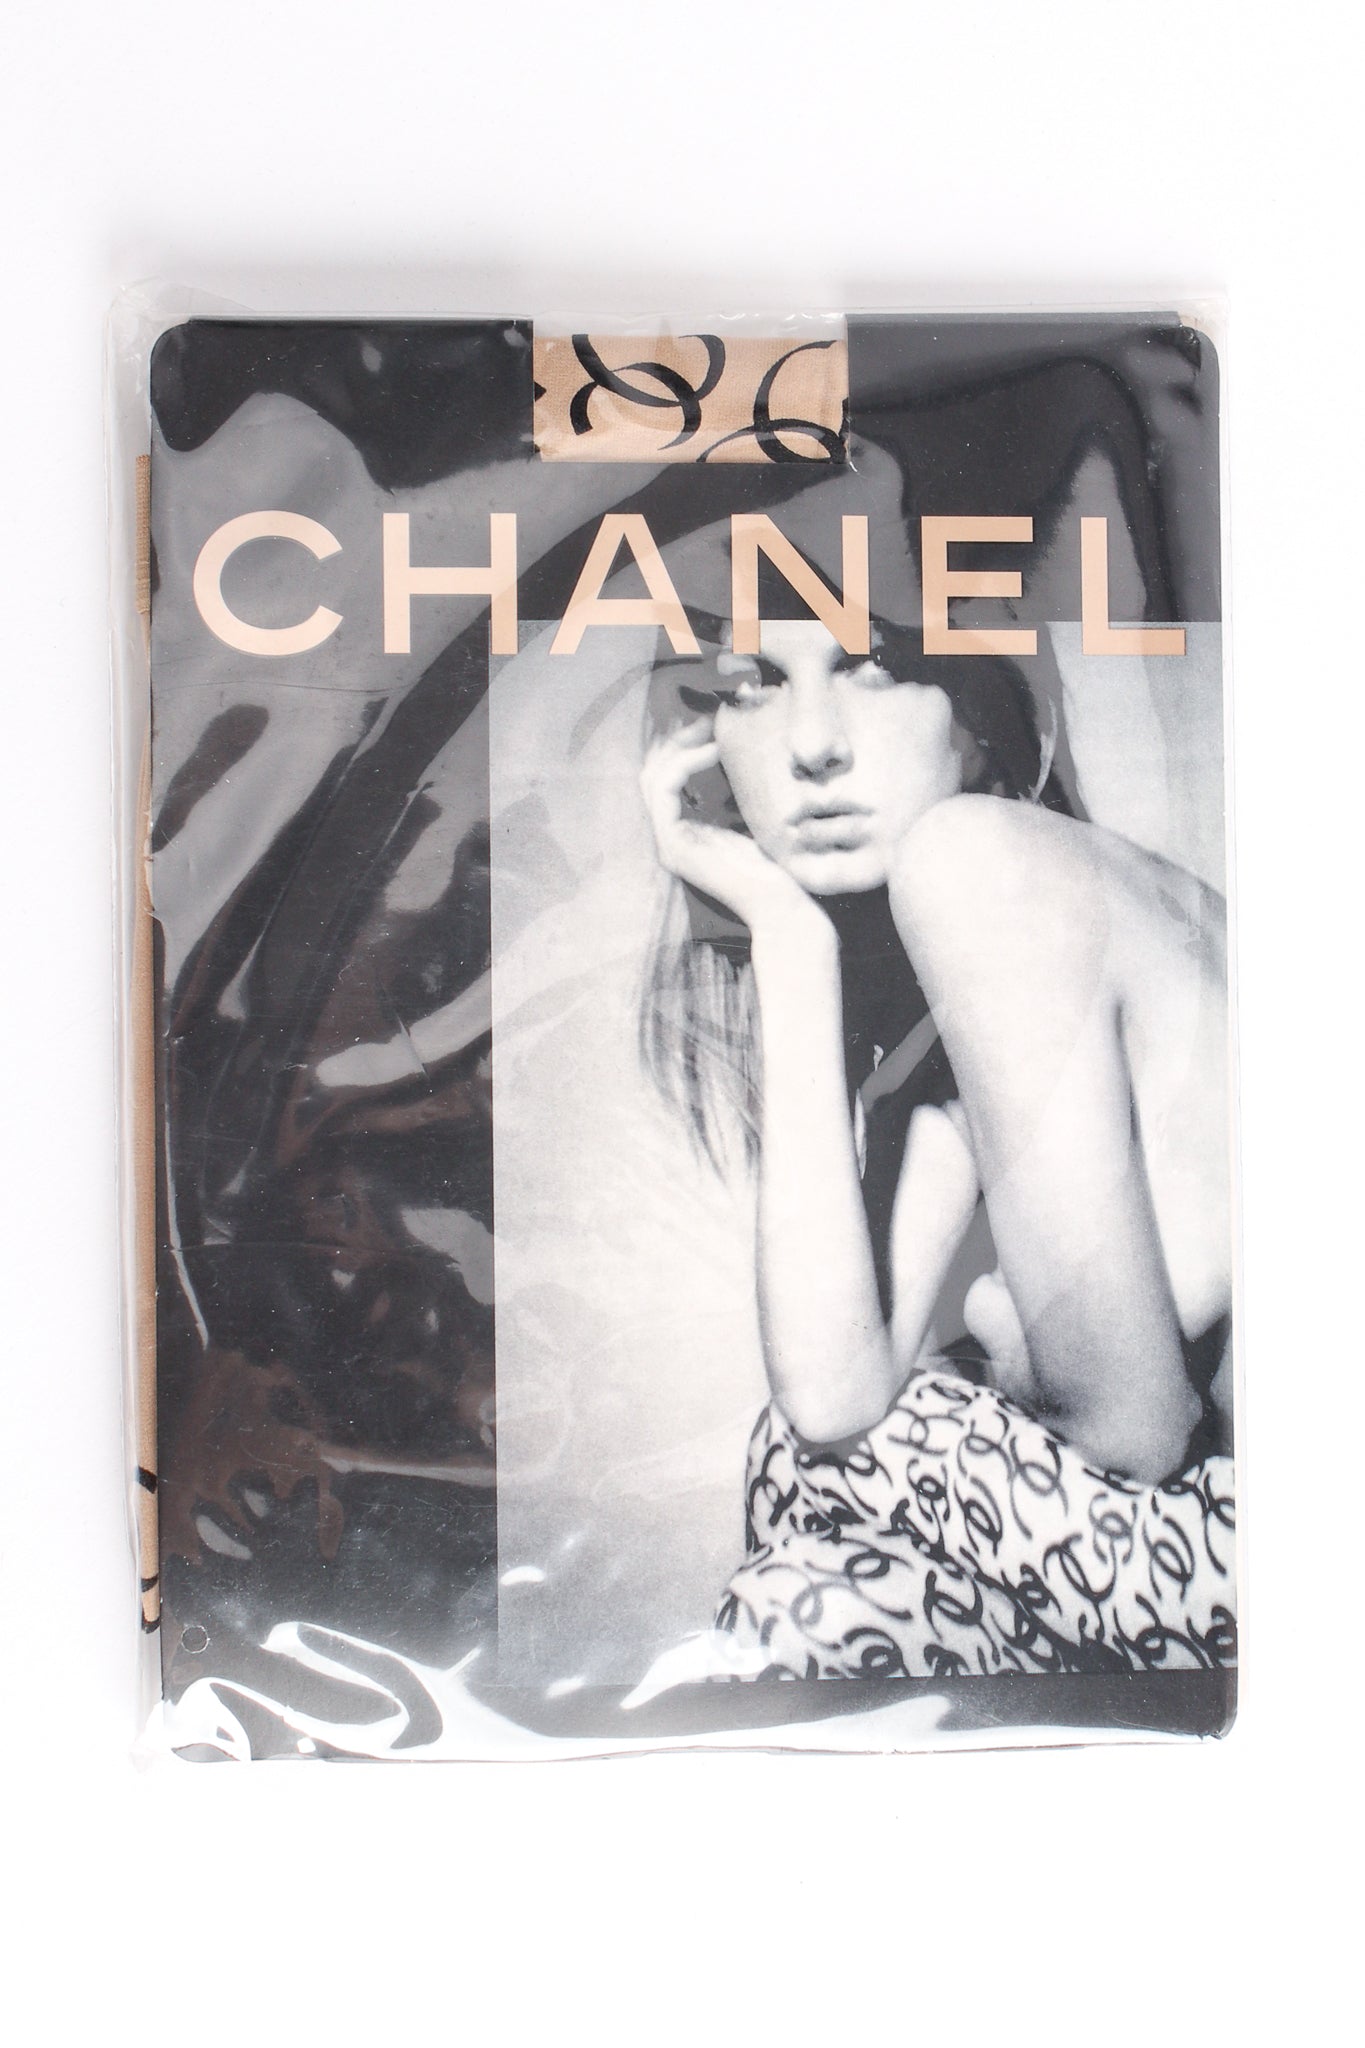 Online promotionNew !! CHANEL AUTHENTIC RUNWAY CC LOGO STOCKINGS TIGHTS  PANTYHOSE, chanel cc tights 